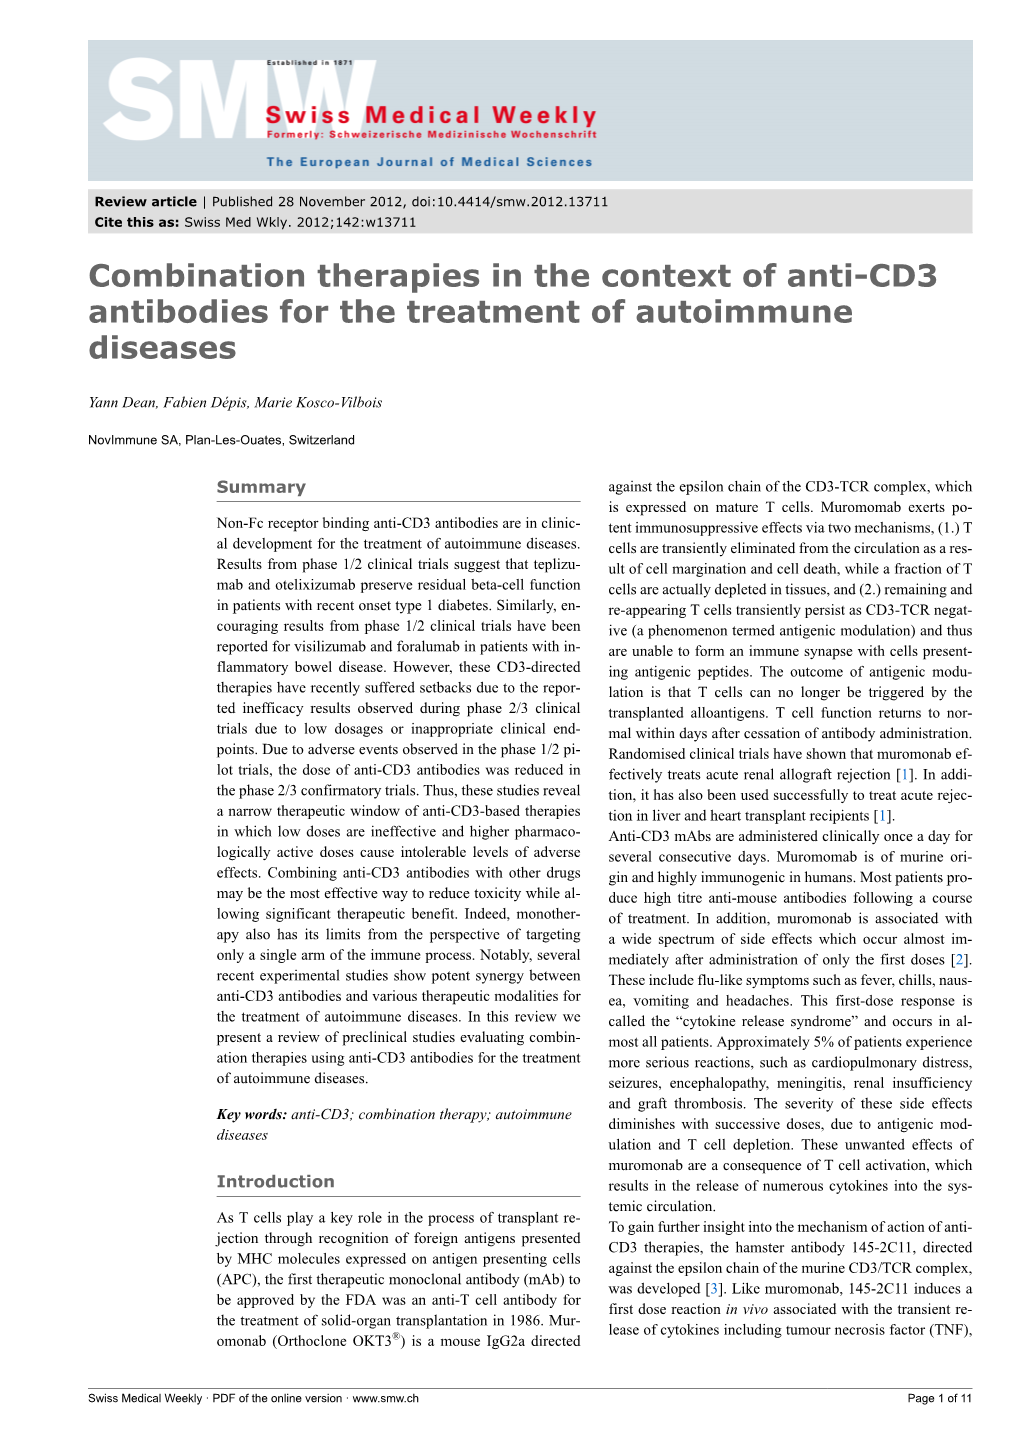 Combination Therapies in the Context of Anti-CD3 Antibodies for the Treatment of Autoimmune Diseases